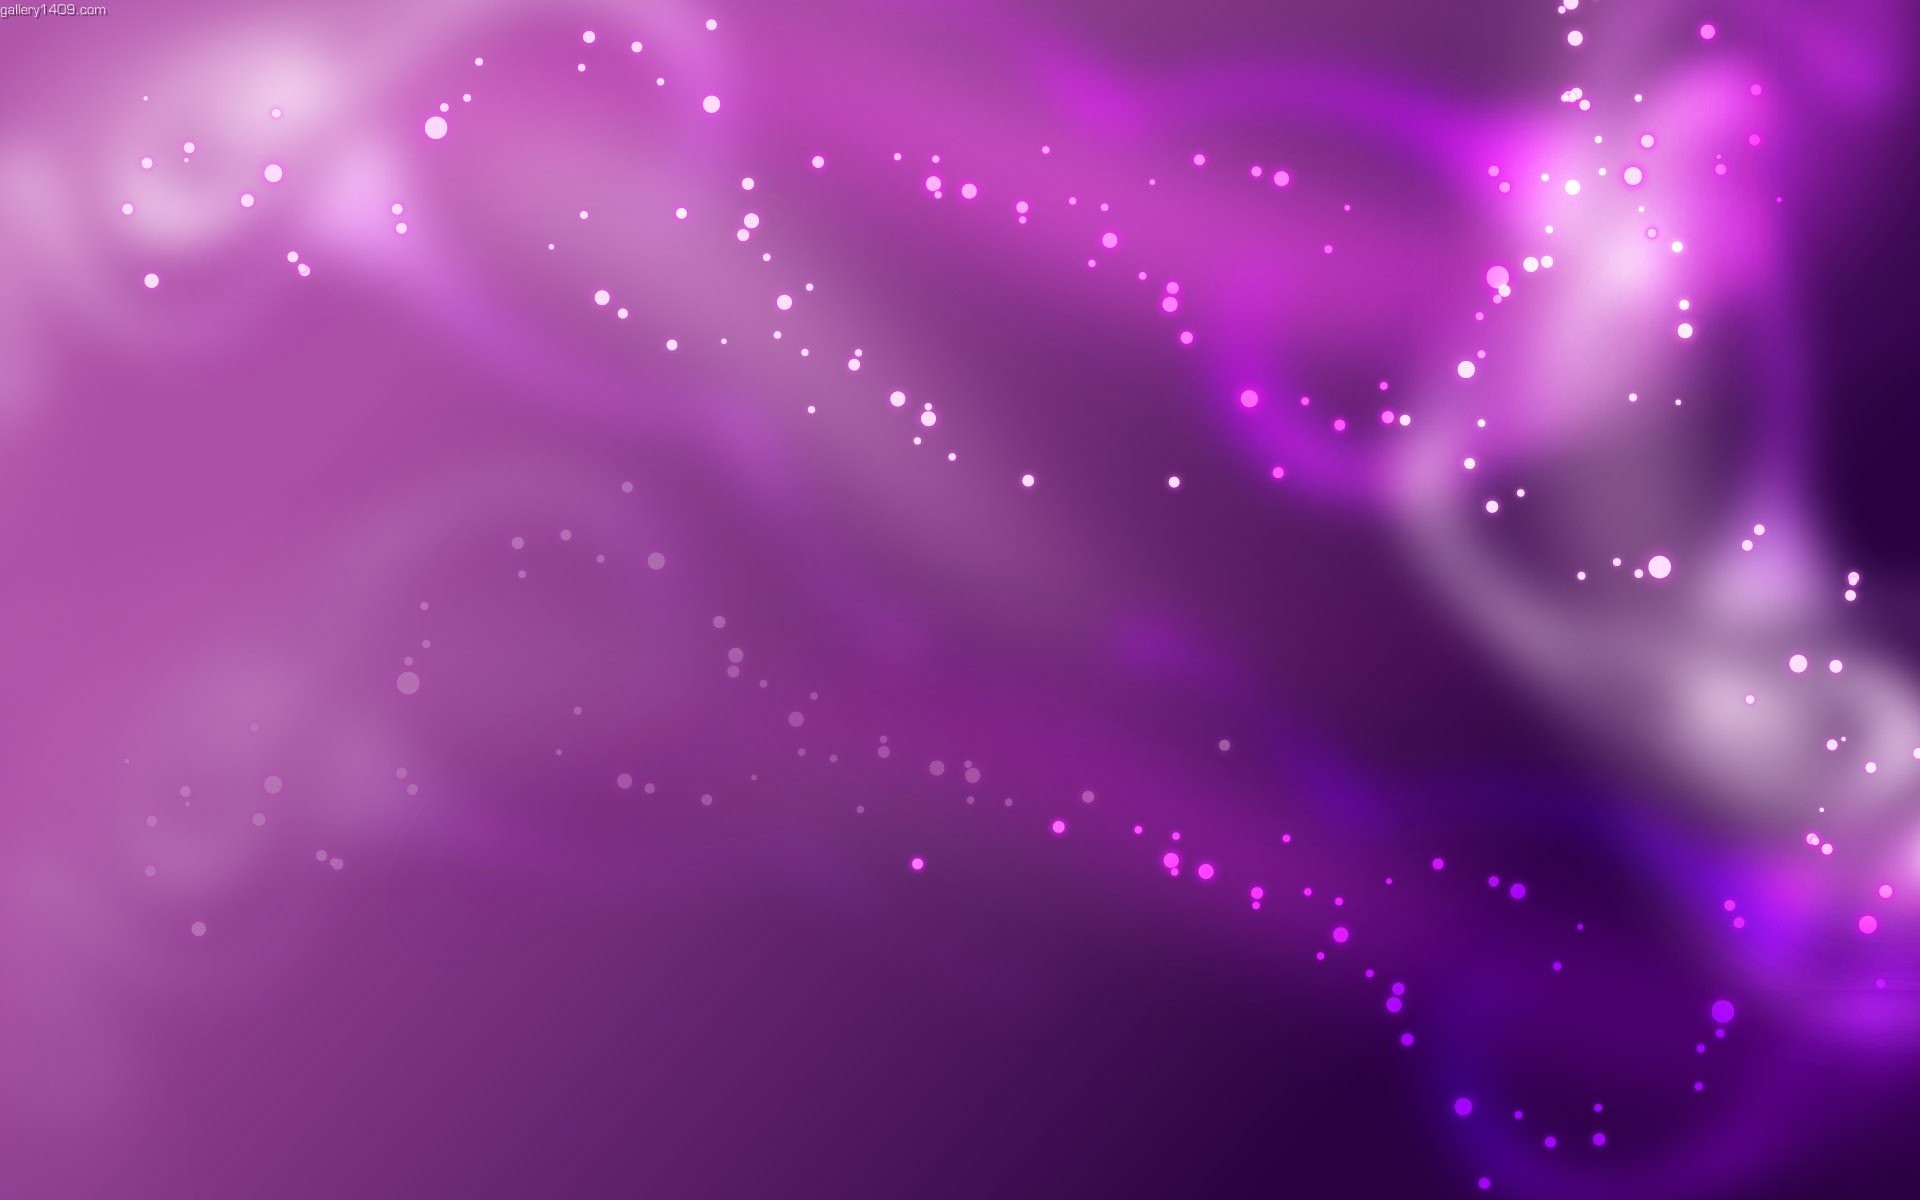 girly-laptop-wallpapers-picture-colour-particles-backgrounds.jpg (